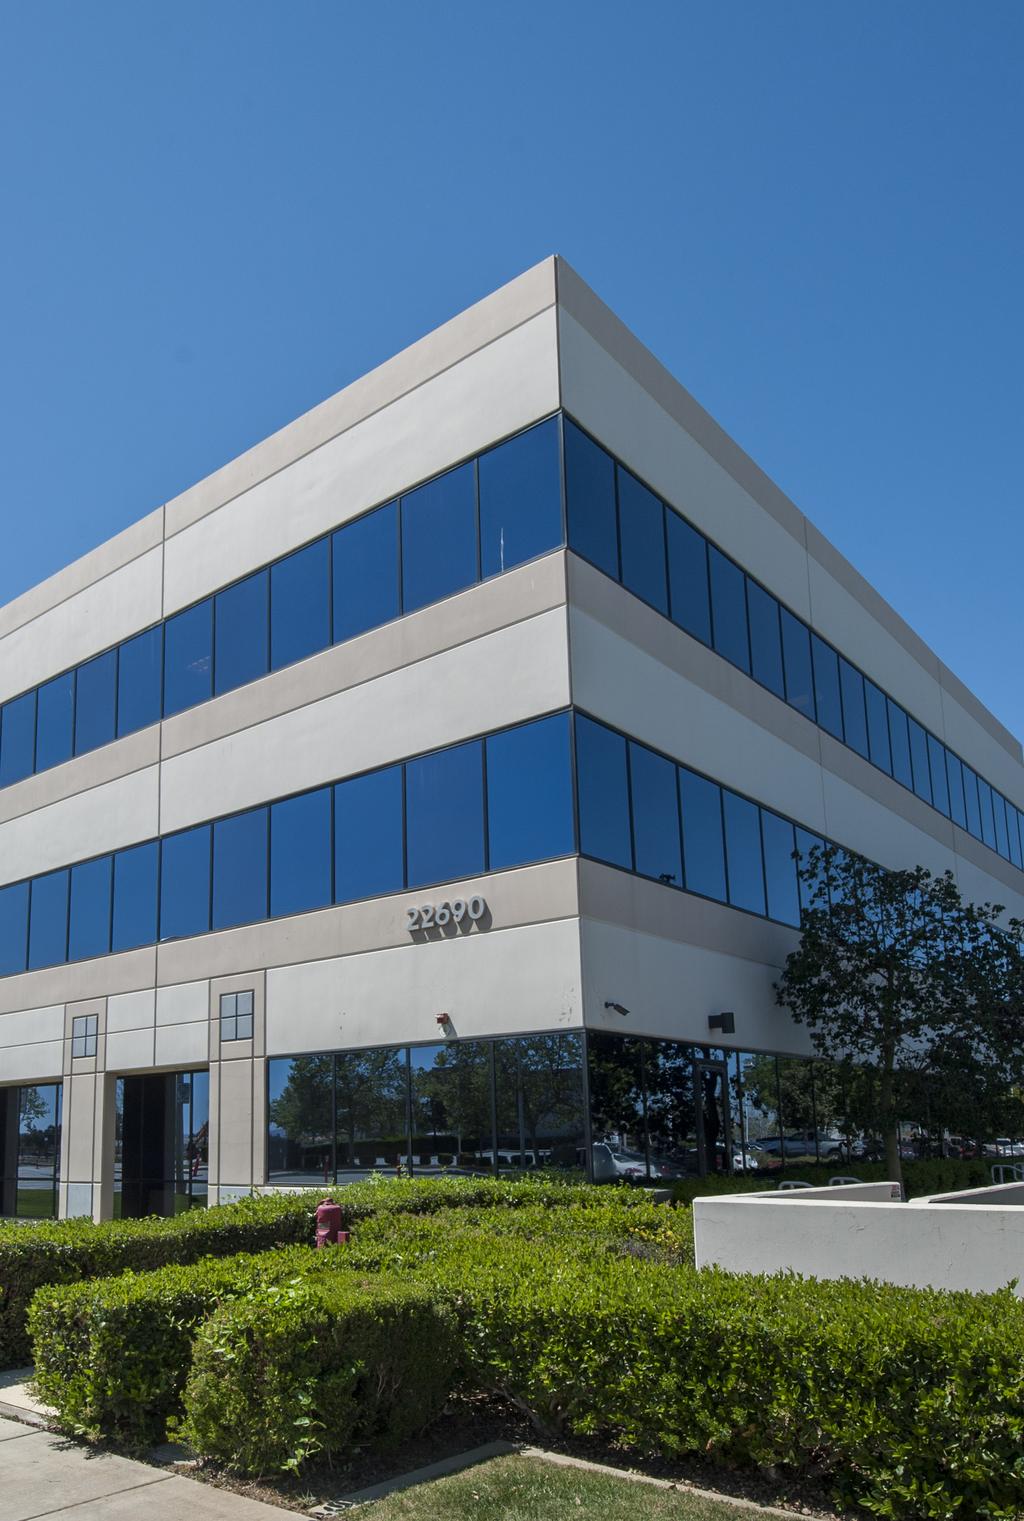 EXECUTIVE SUMMARY CBRE is pleased to present an excellent opportunity to acquire the Moreno Corporate Center, a Class A office building totaling 61,124 square feet in the desirable Inland Empire